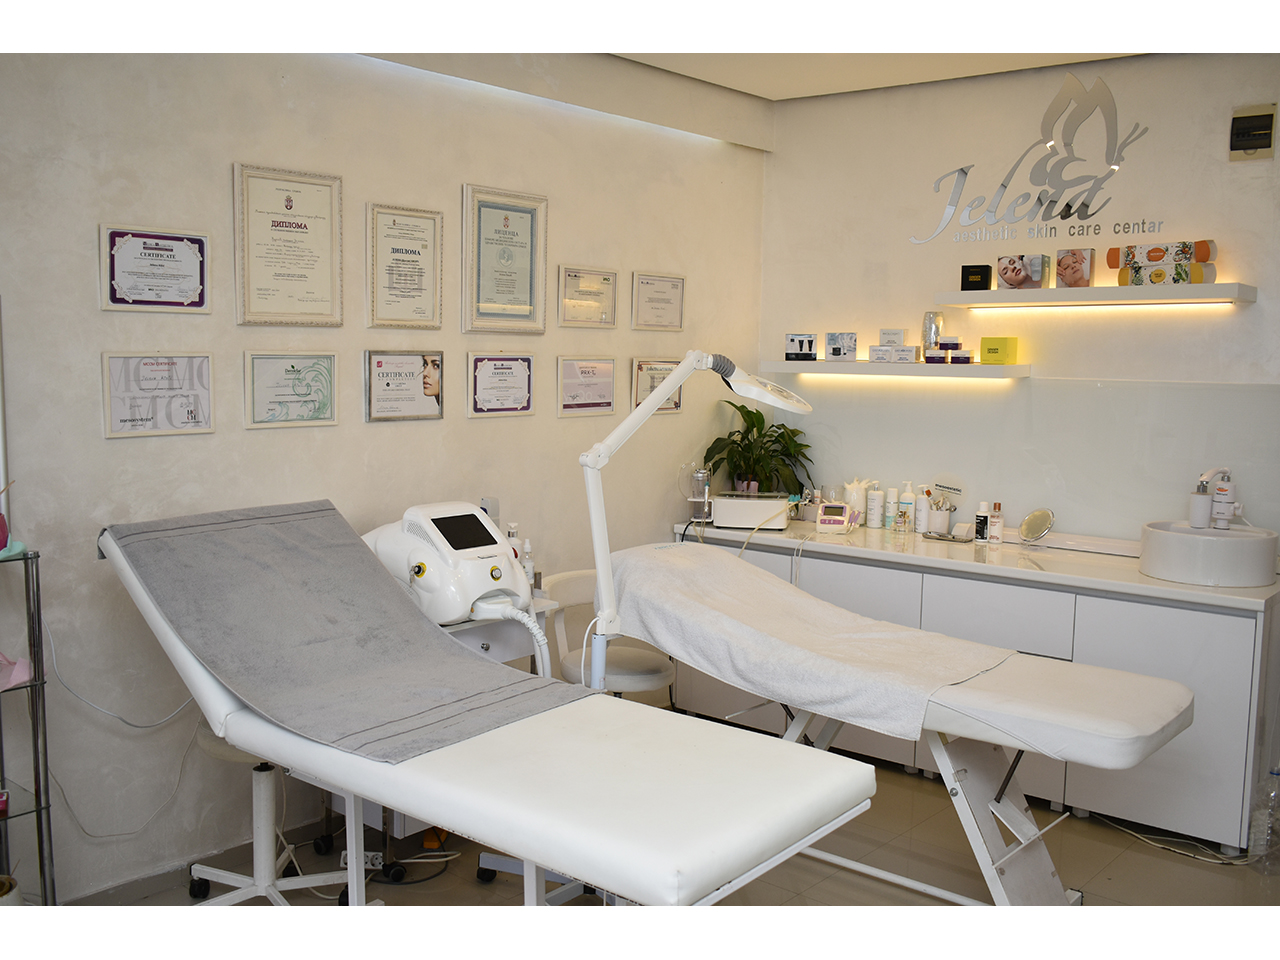 AESTHETIC CENTER AND SKIN CARE JELENA Masage Beograd